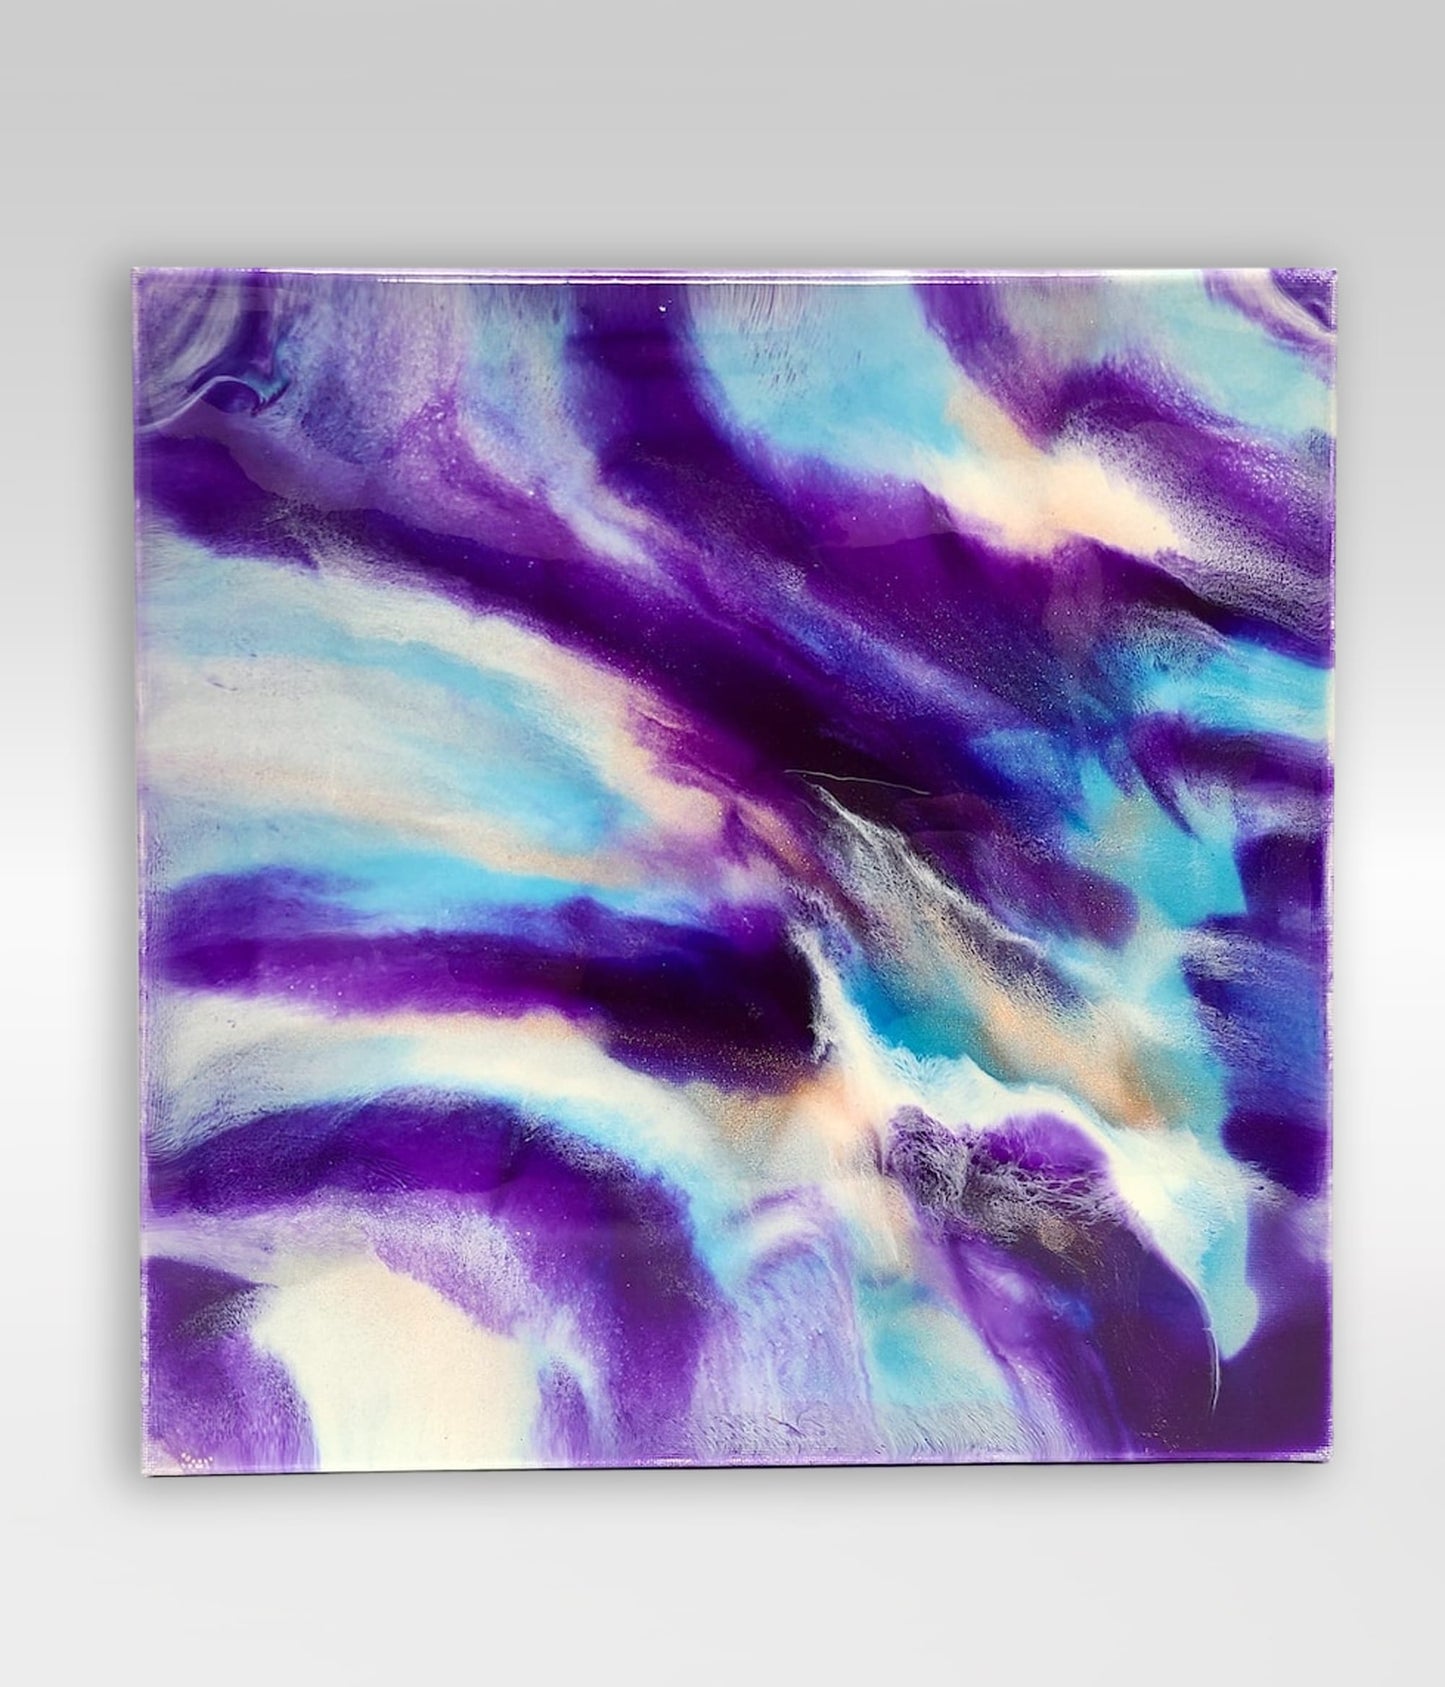 Loony – 12 x 12 Resin Painting On Canvas